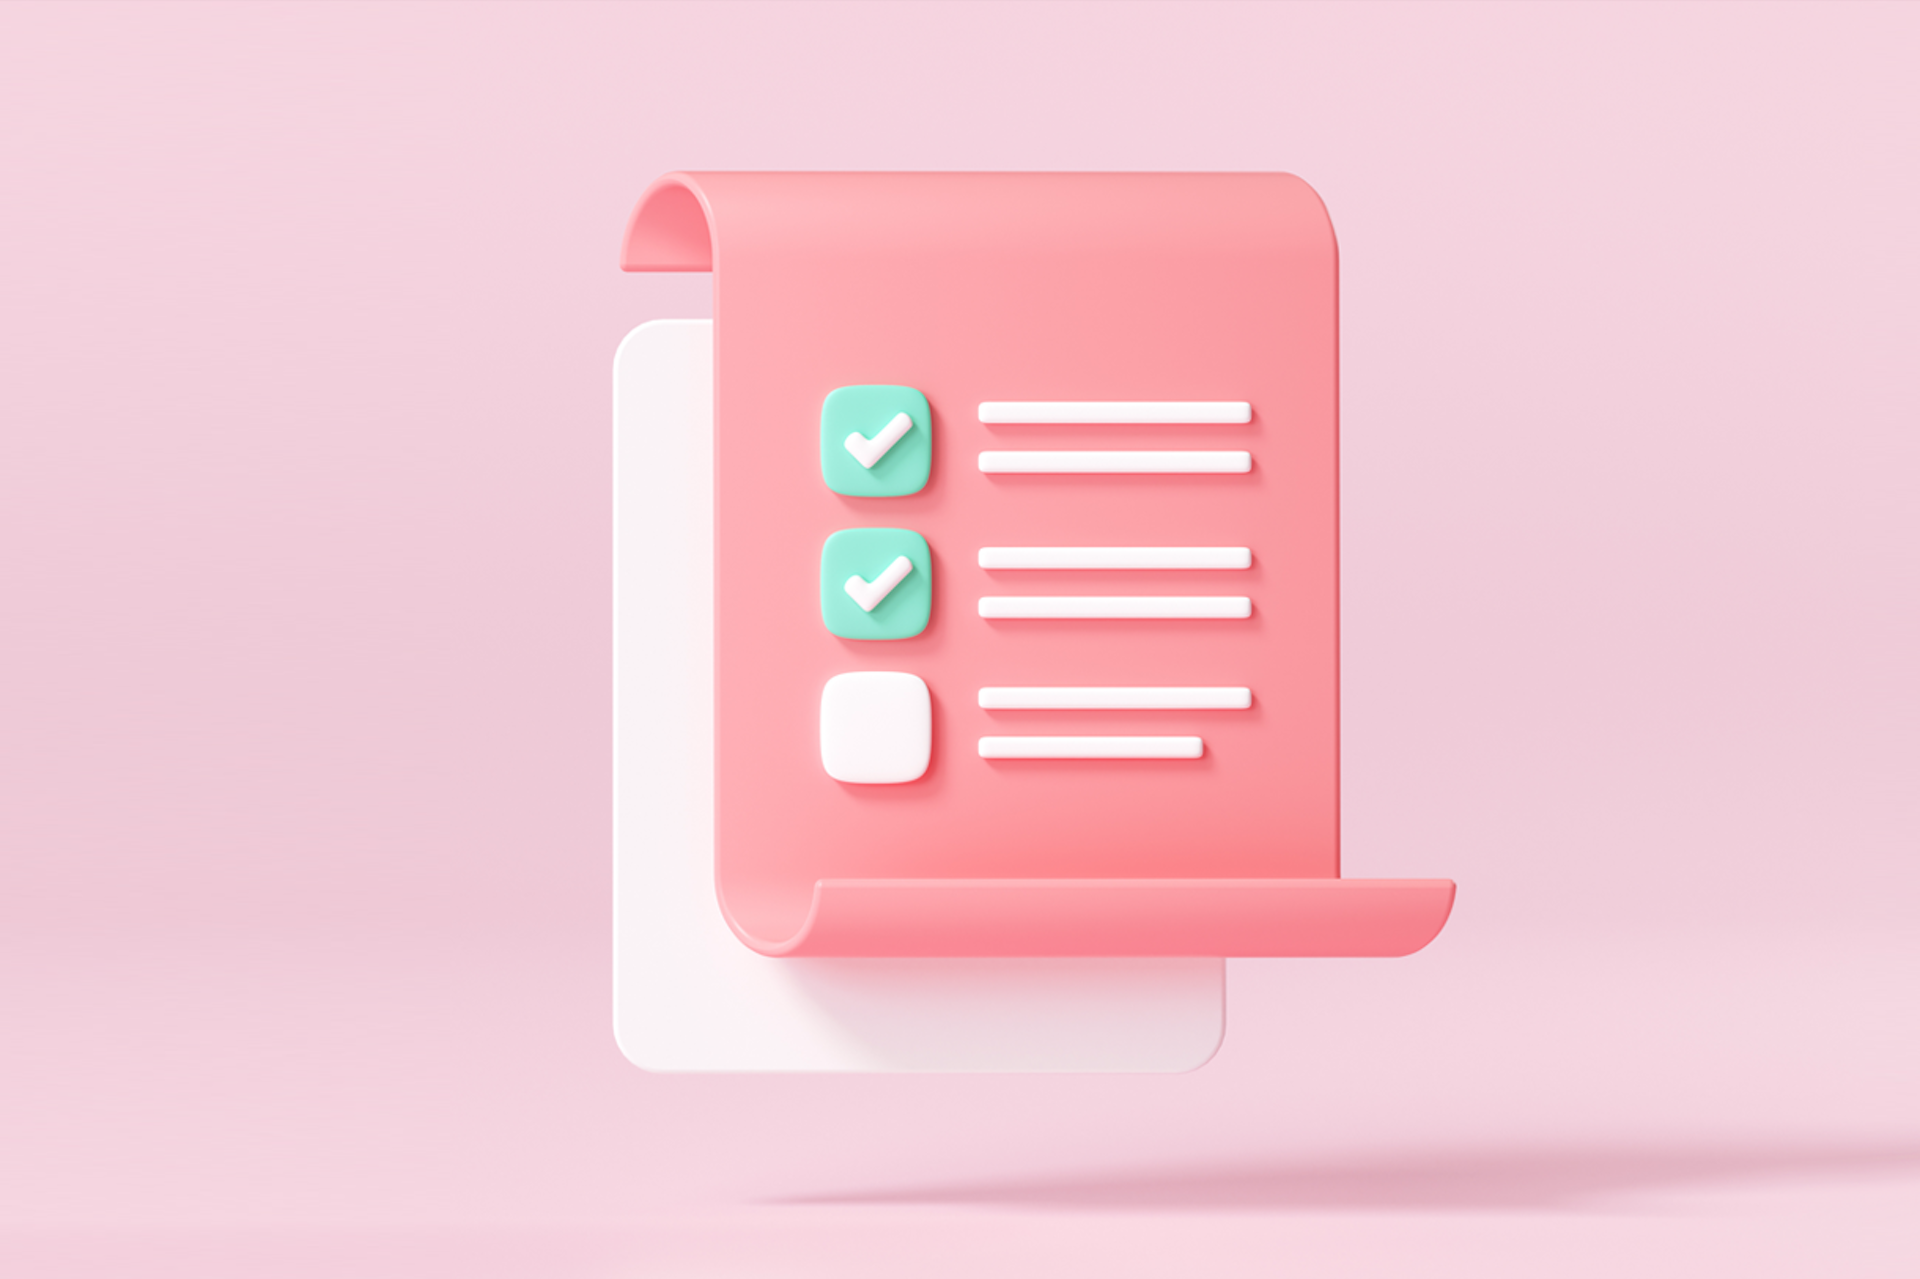 A giant checklist with two items checked off the list. A PR manager has a number of tasks to do in their day, so having a clearly defined checklist is critical to executing on a public relations strategy.